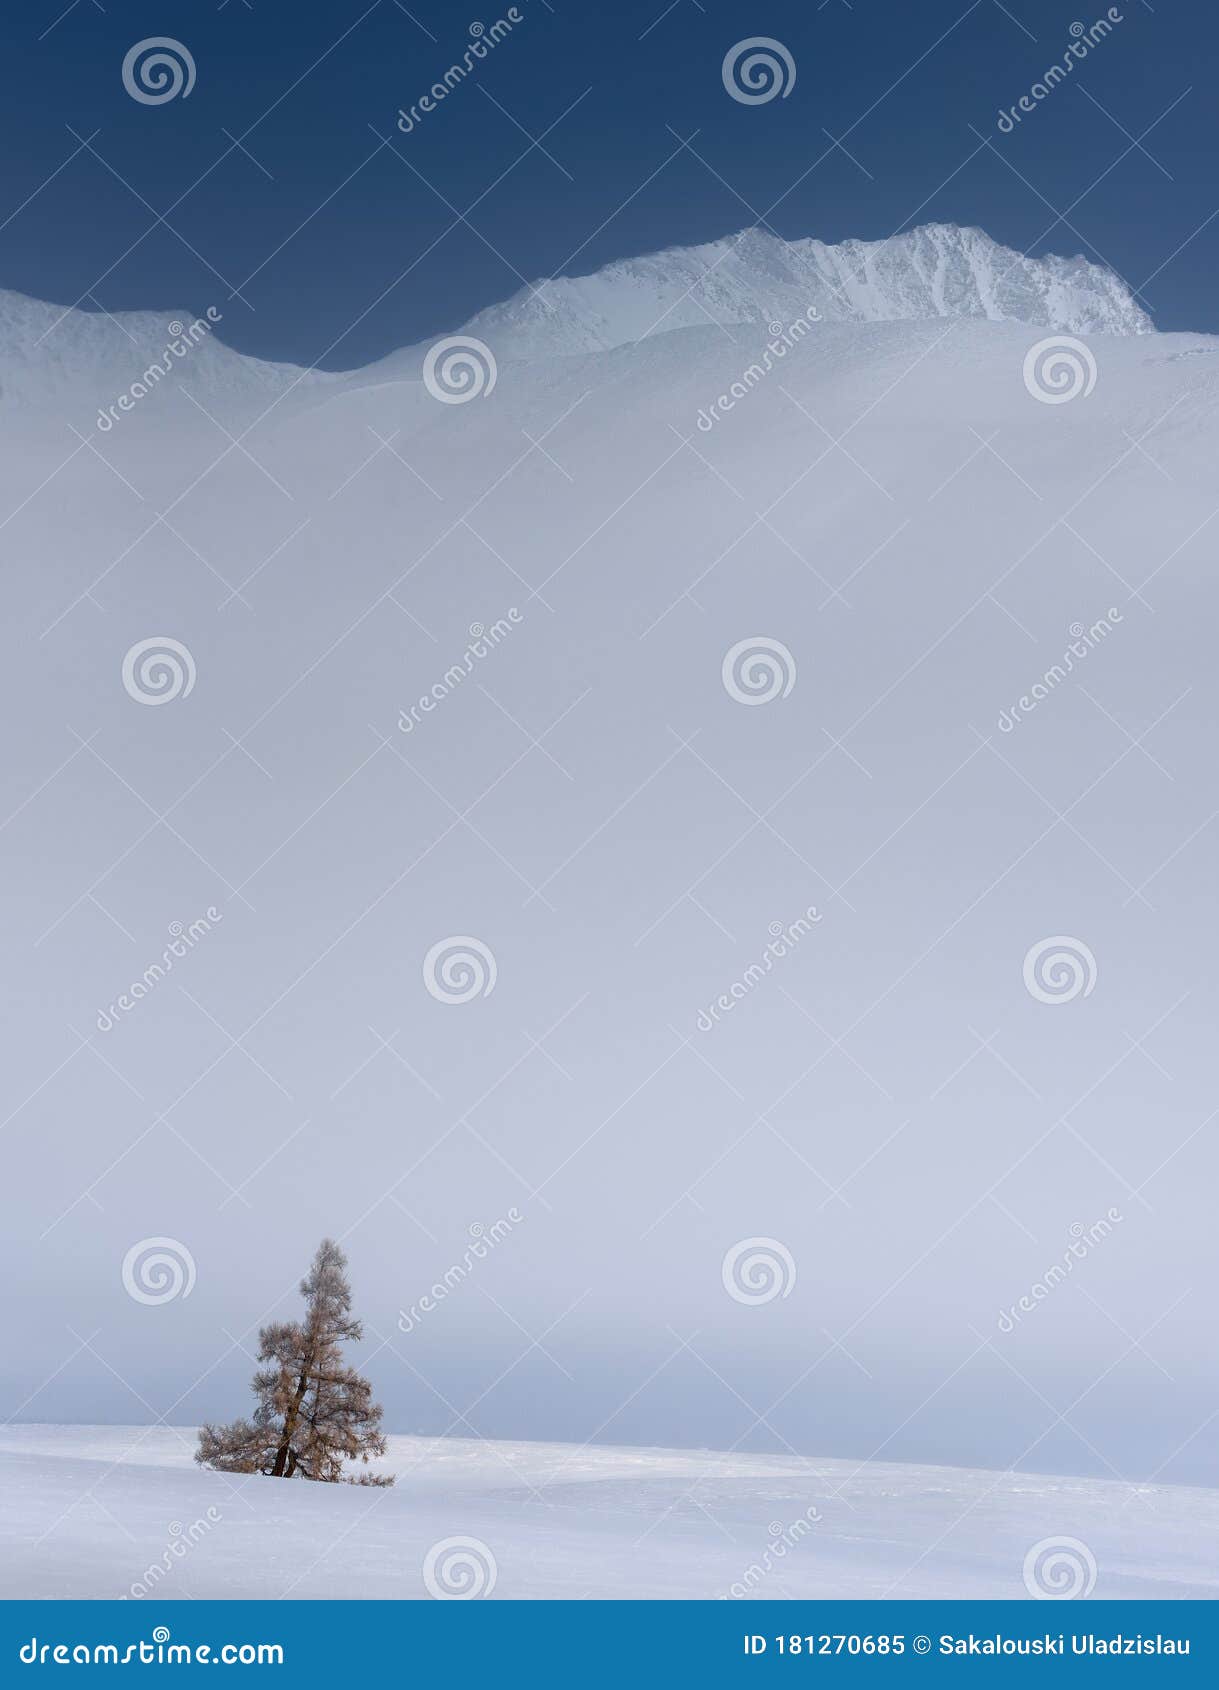 kurai ridge, western siberia, russia. lonely yellow larch tree on the background of foggy rocky altai mountains and cloudless blue